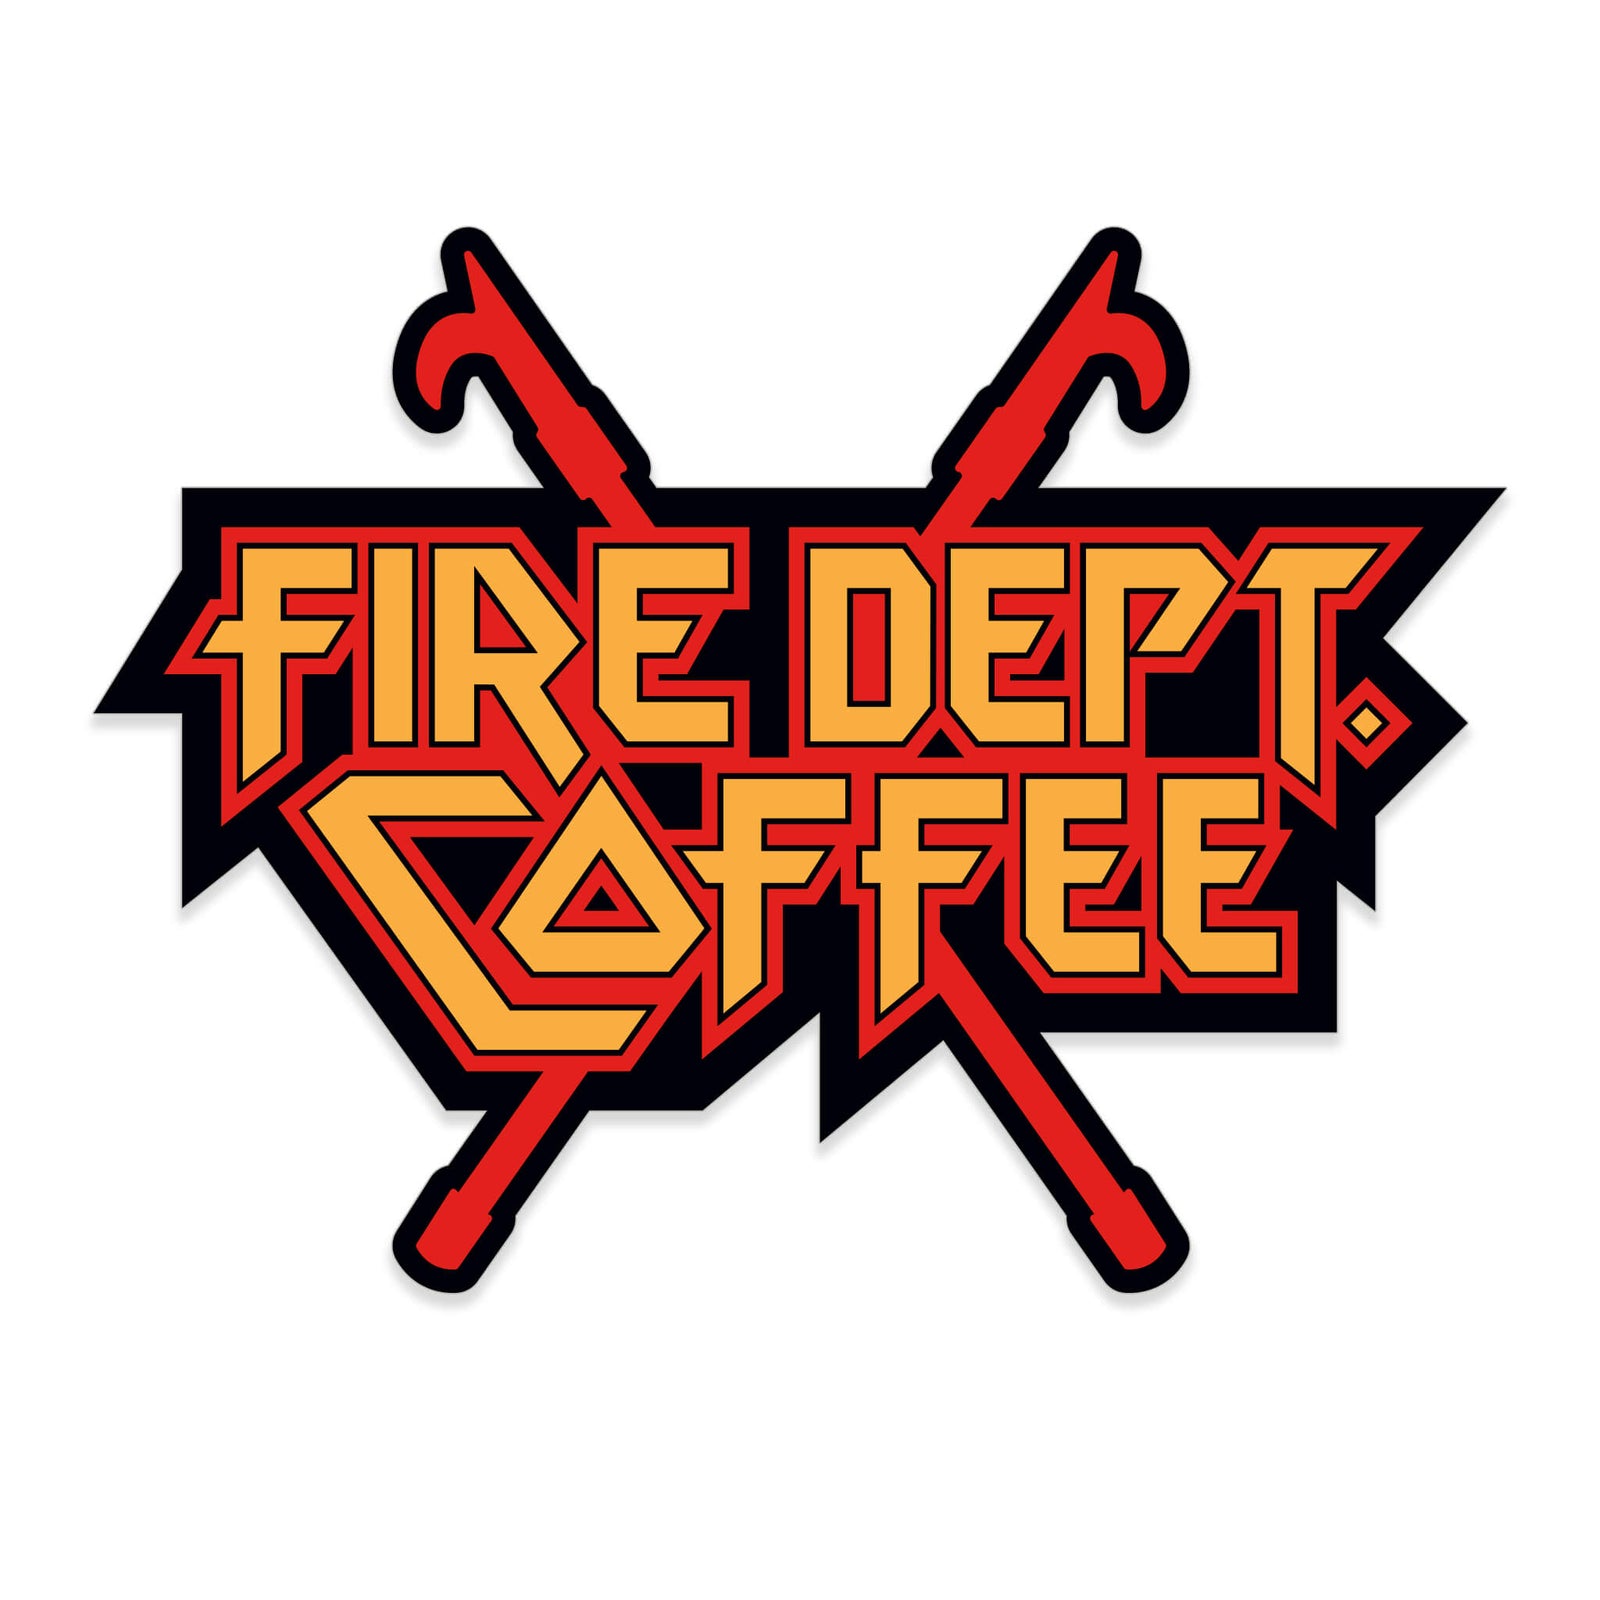 Sticker with "Fire Dept. Coffee" in 80s heavy metal style red and yellow lettering and two red pike poles crossing in the middle